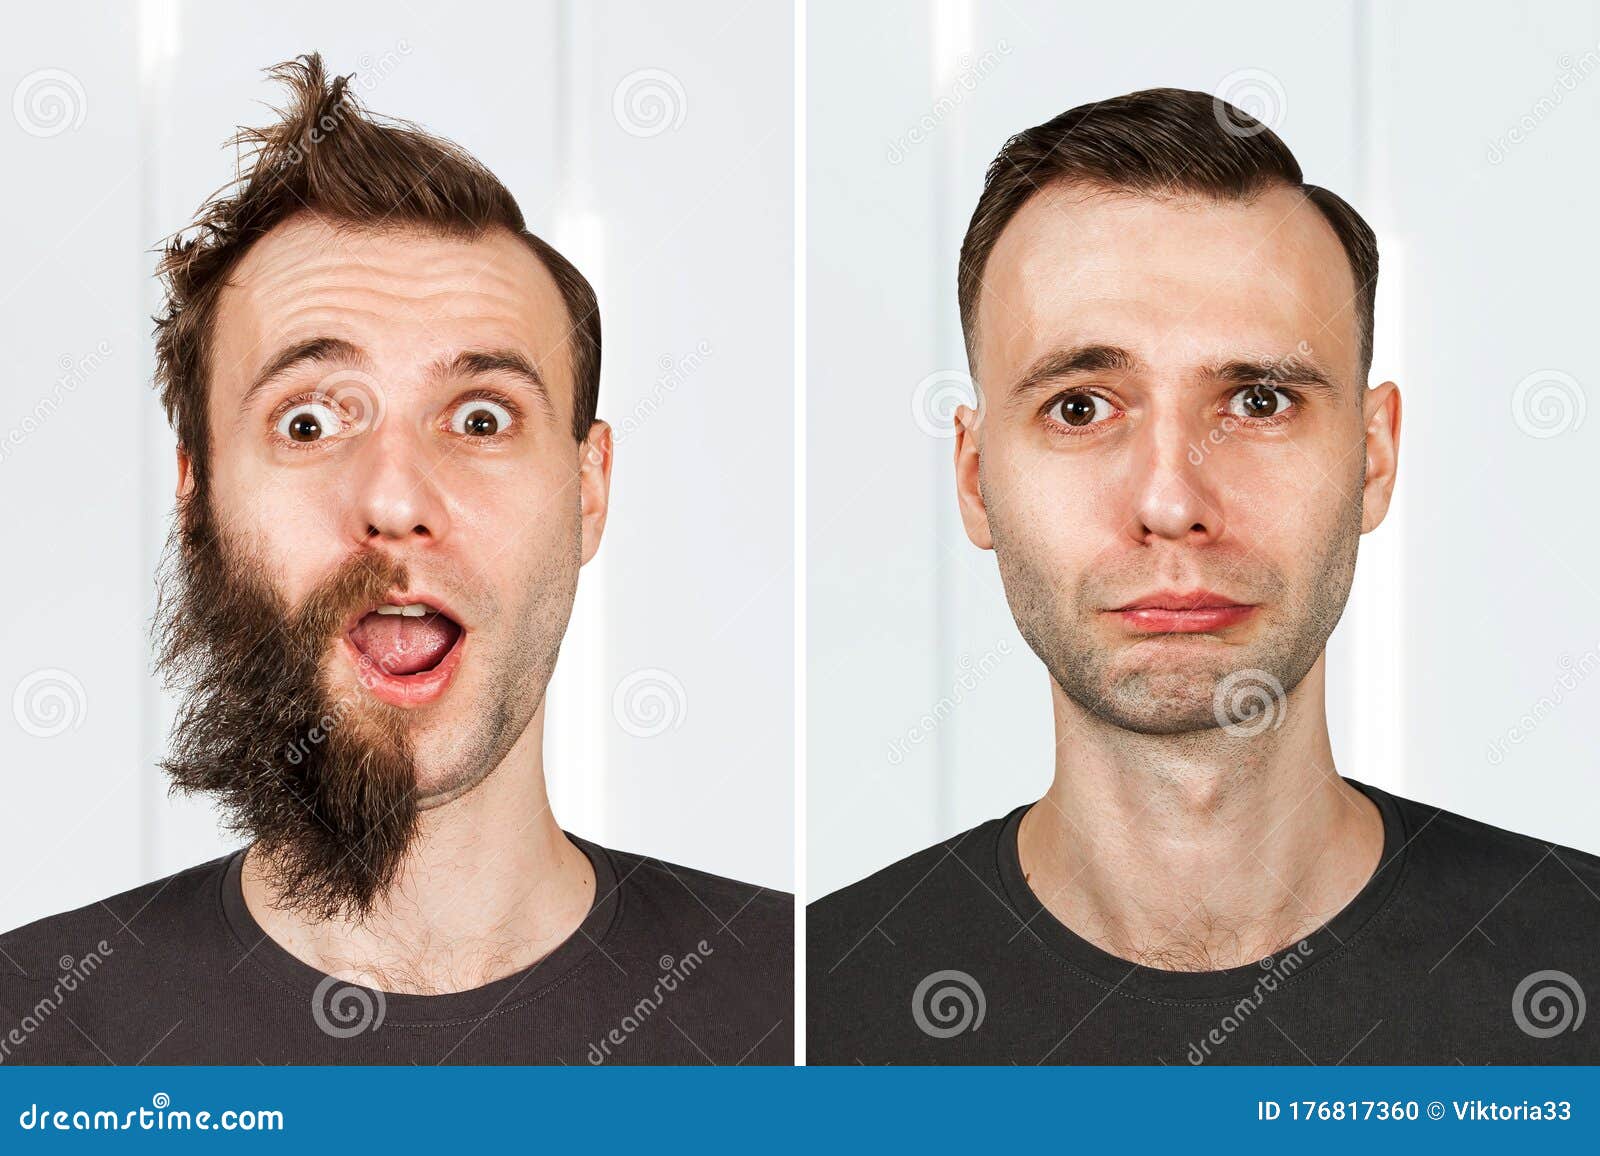 15 Best Beard Styles Without Moustache How to Guide  Examples  The Beard  Struggle